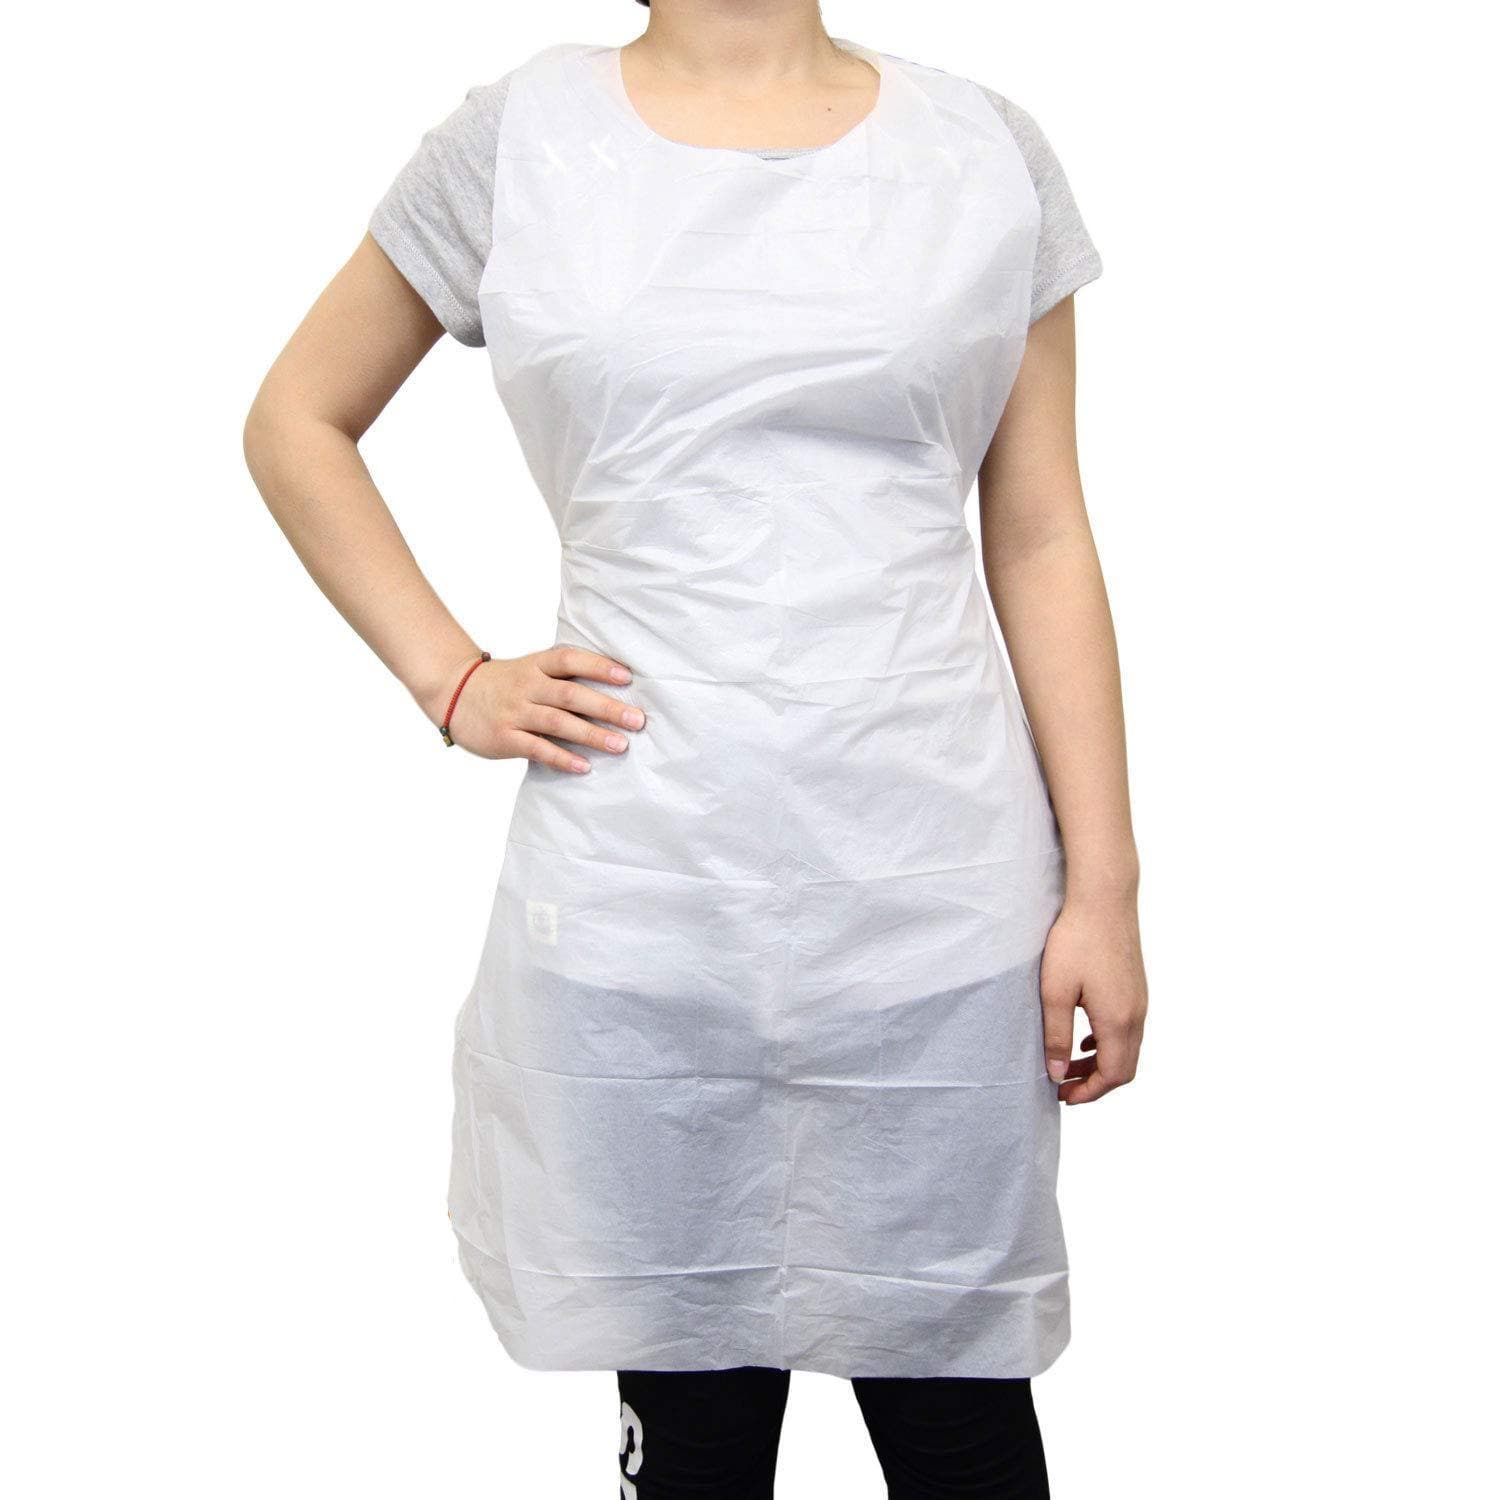 Disposable White Plastic Apron - Pack of 100 Aprons